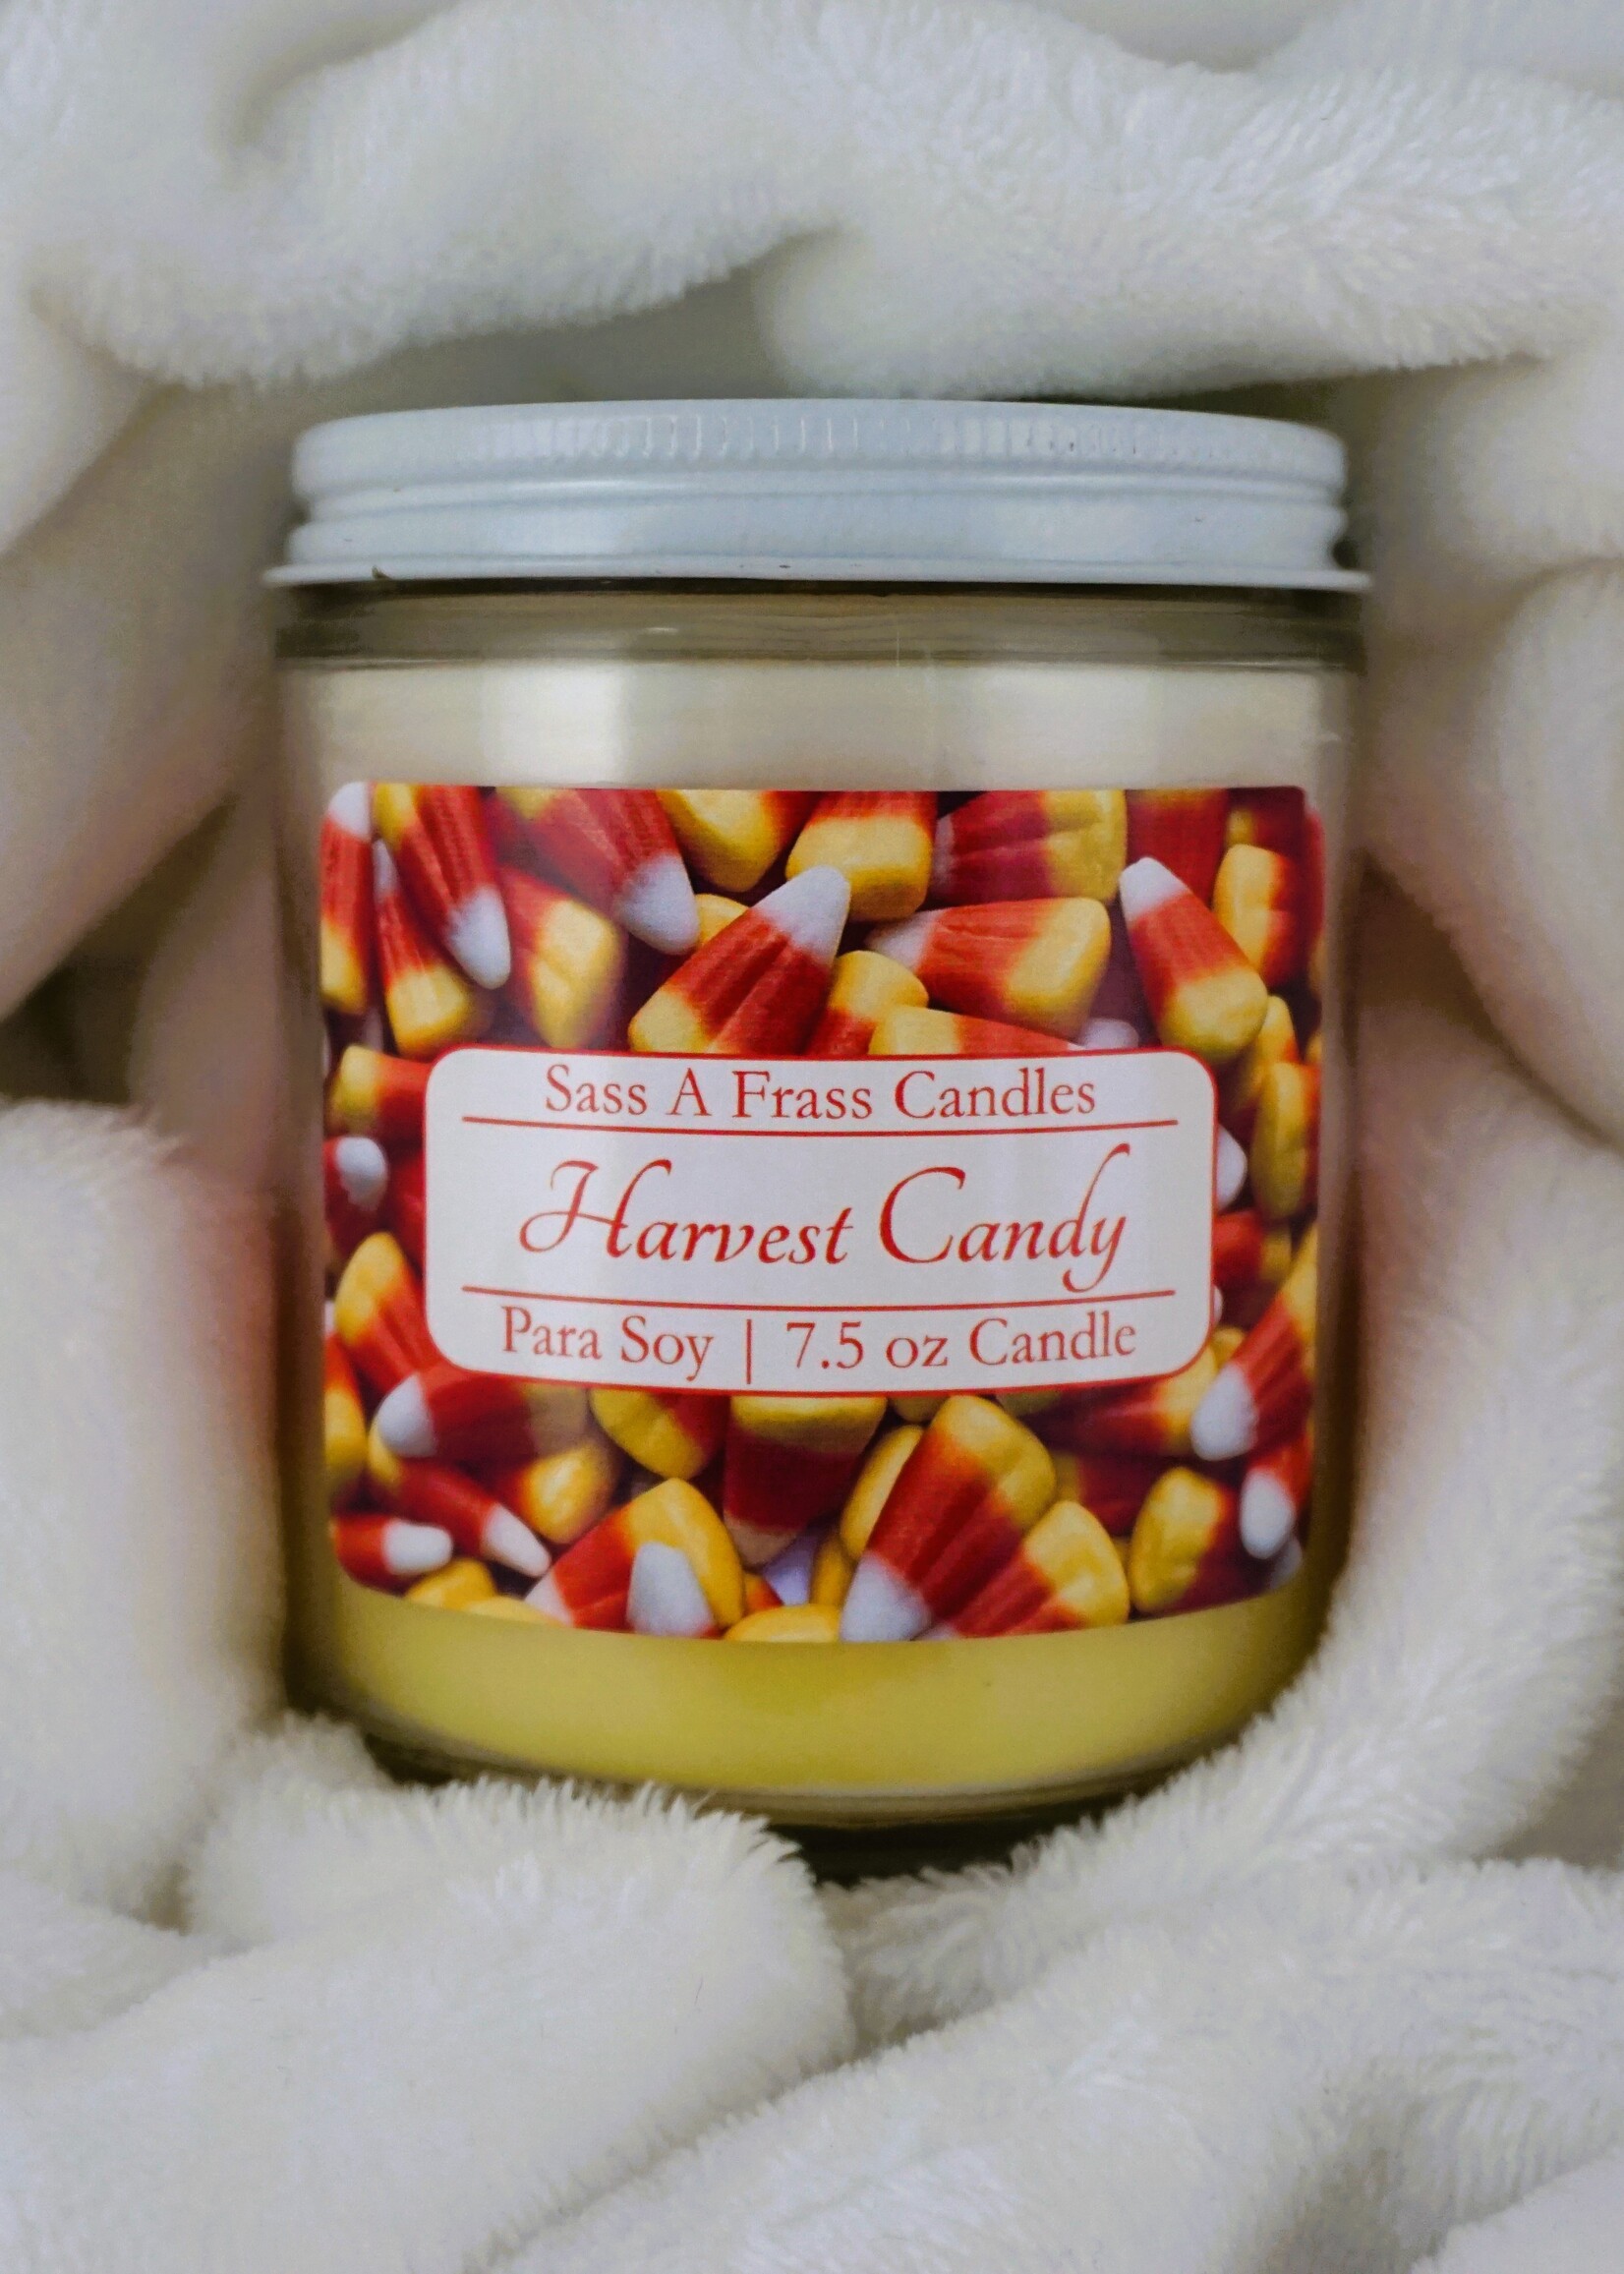 Harvest Candy 7.5 oz Candle